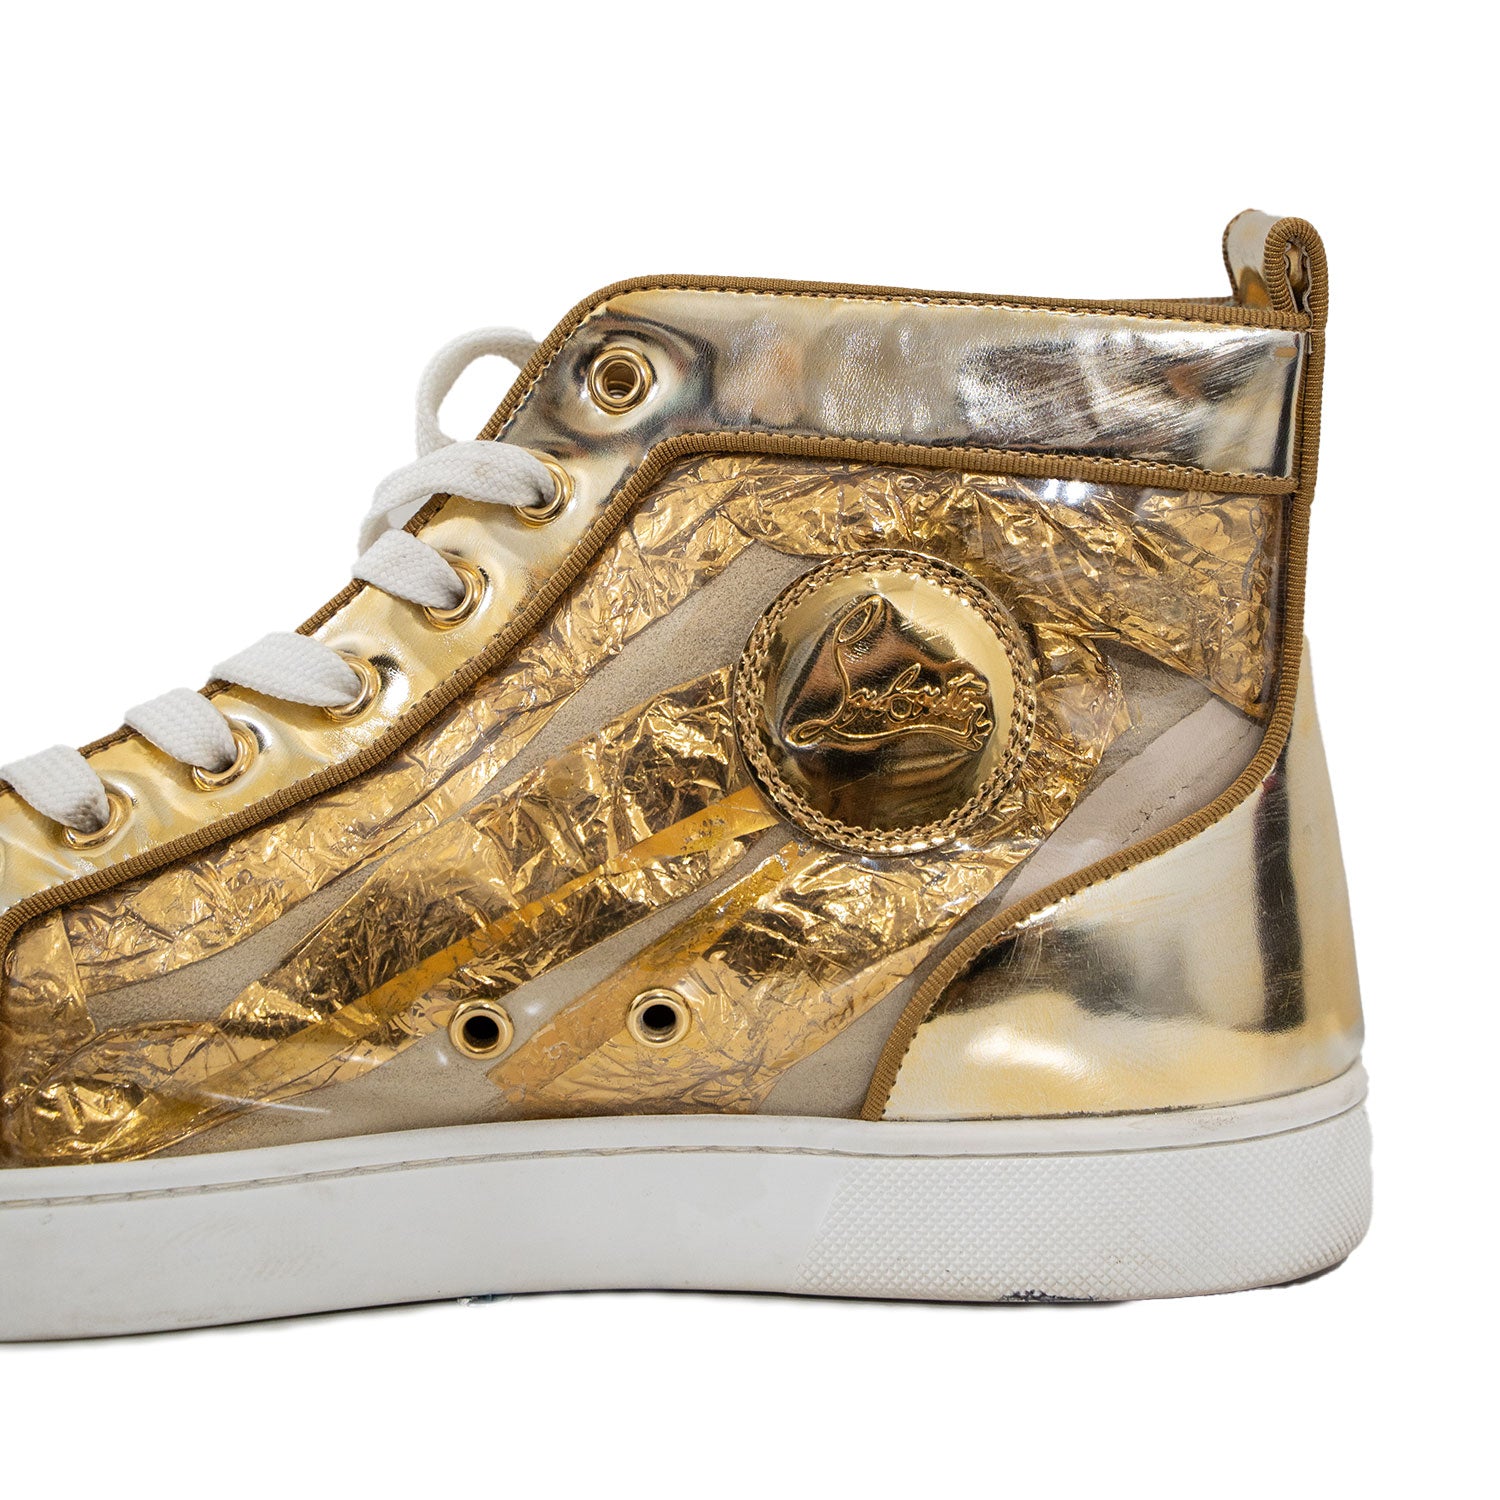 Christian Louboutin Men's Gold Foil Leather Mid-Top Sneakers – The 